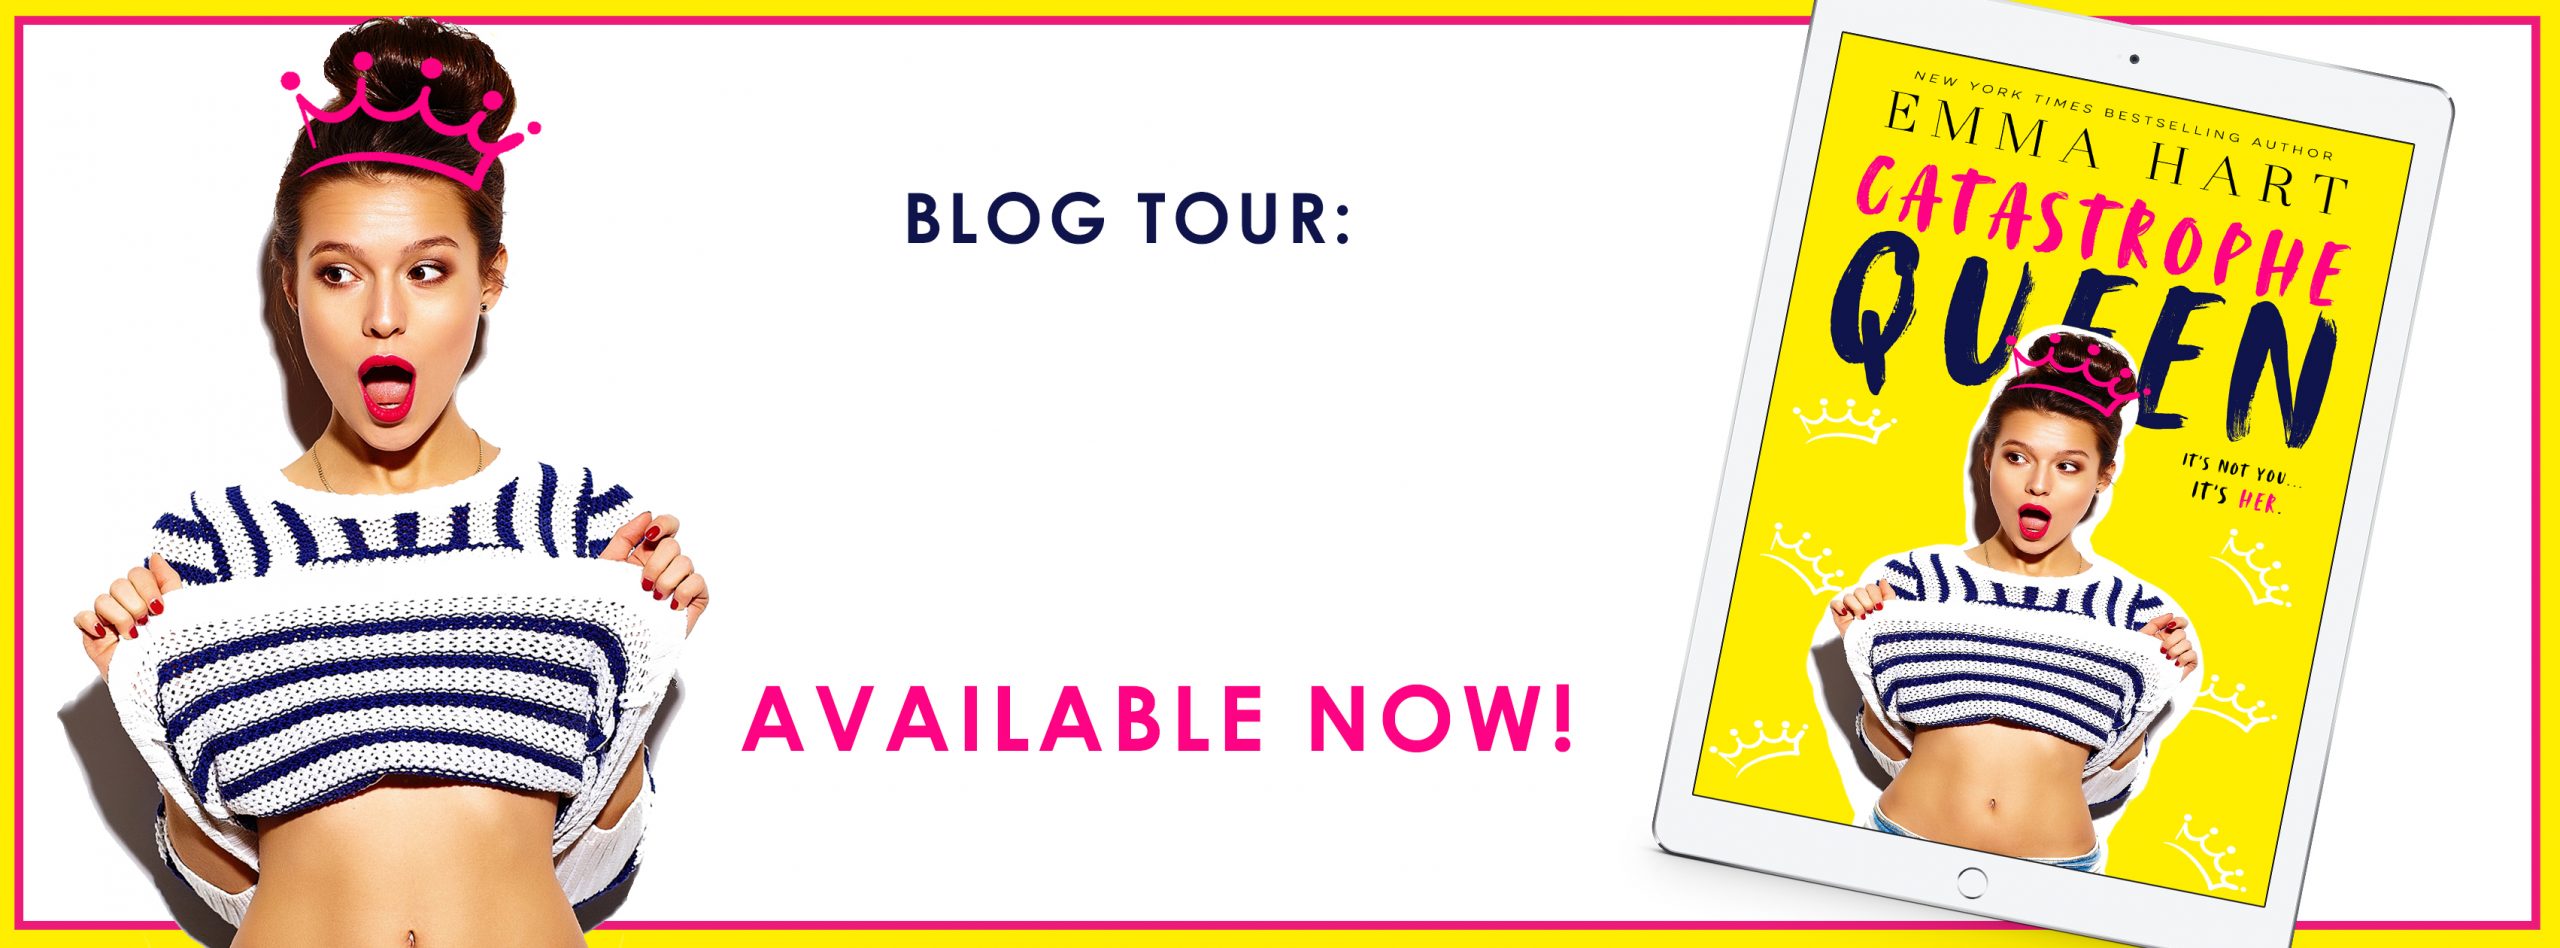 Blog Tour Review:  Catastrophe Queen by Emma Hart